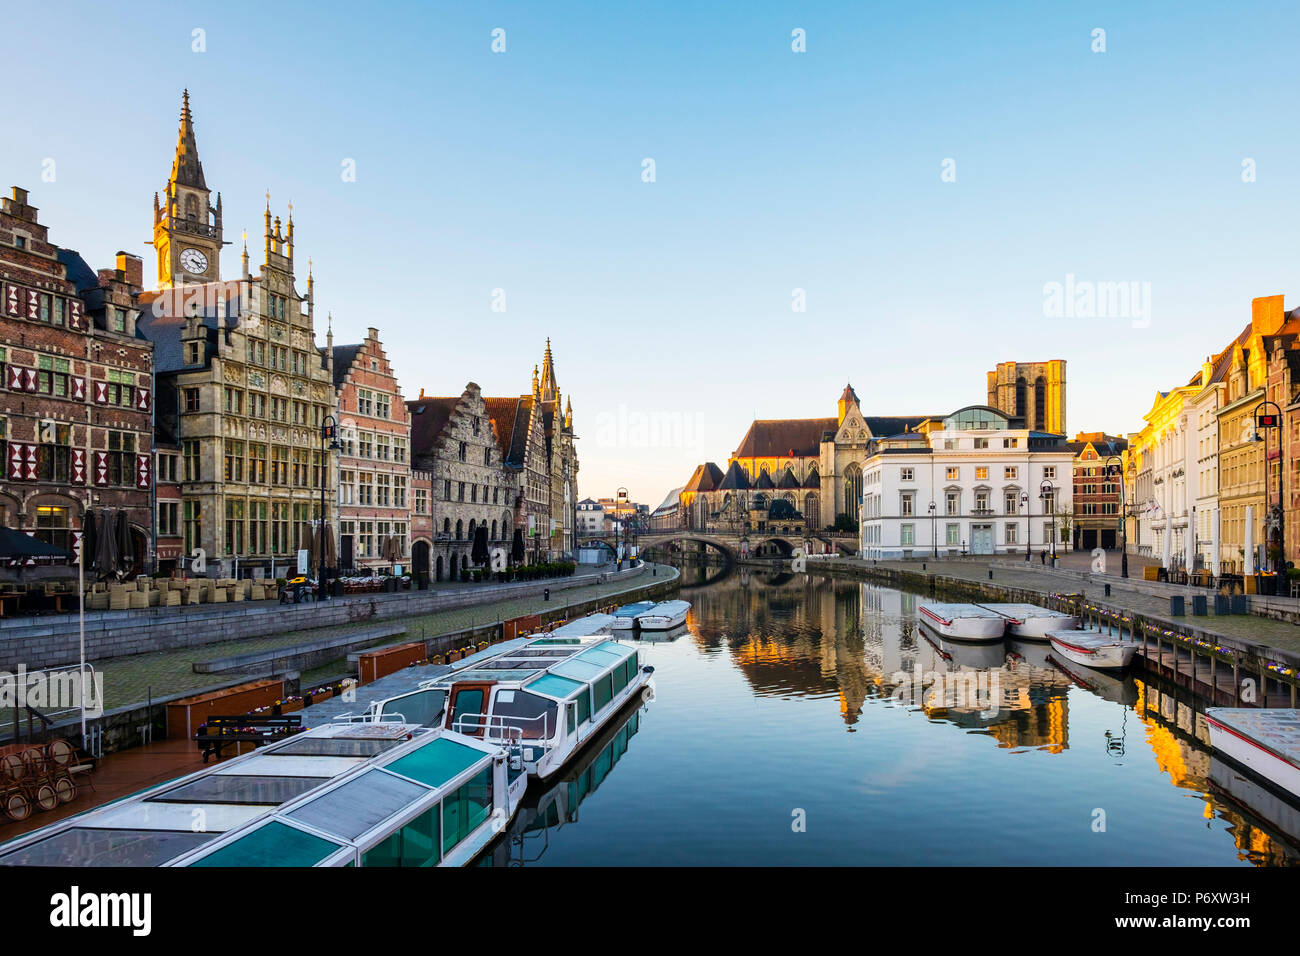 Belgium, Flanders, Ghent (Gent). The Leie River and buildings along Graslei quay at dawn. Stock Photo